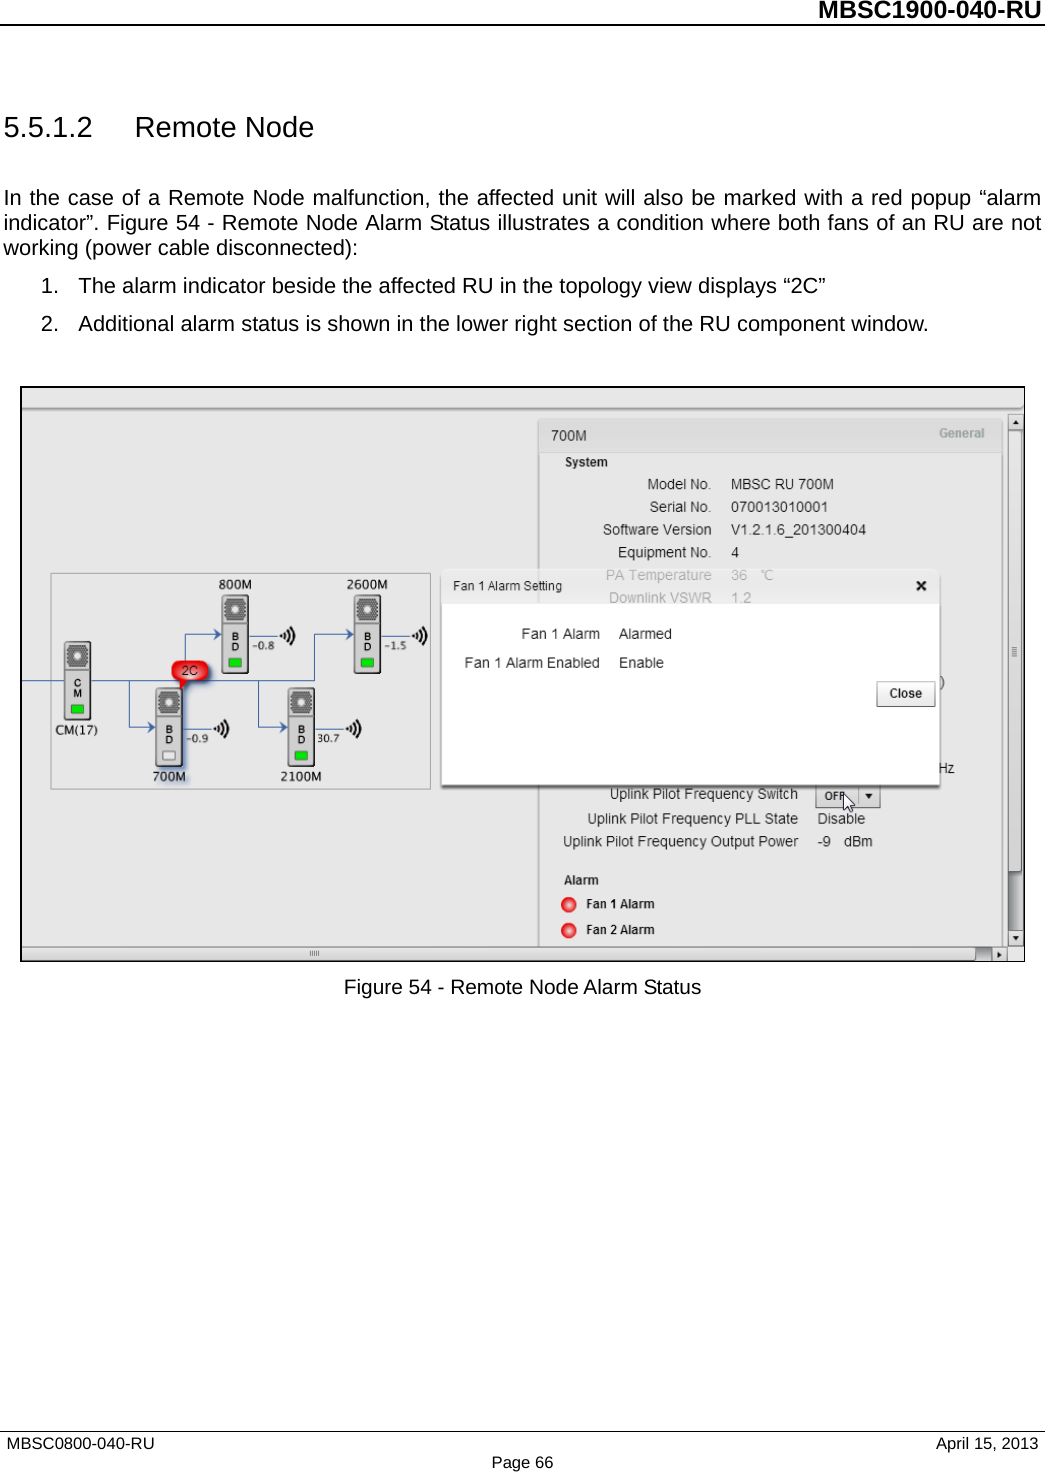          MBSC1900-040-RU   5.5.1.2 Remote Node In the case of a Remote Node malfunction, the affected unit will also be marked with a red popup “alarm indicator”. Figure 54 - Remote Node Alarm Status illustrates a condition where both fans of an RU are not working (power cable disconnected): 1. The alarm indicator beside the affected RU in the topology view displays “2C”   2. Additional alarm status is shown in the lower right section of the RU component window.     Figure 54 - Remote Node Alarm Status MBSC0800-040-RU                                      April 15, 2013 Page 66 